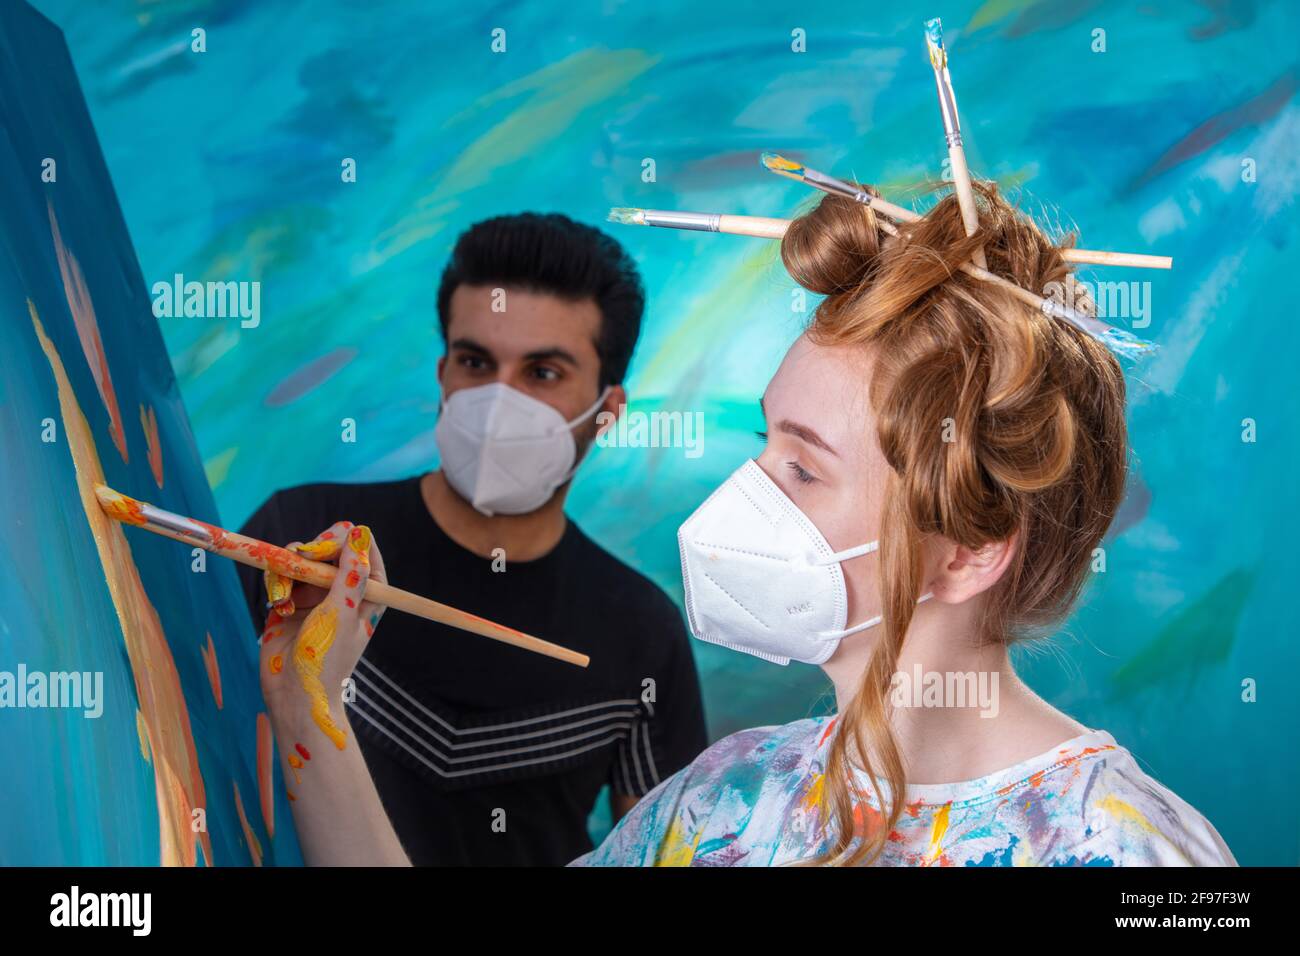 Young woman with updo and brush in her hair while painting, man is watching her, both are wearing FFP2 masks Stock Photo